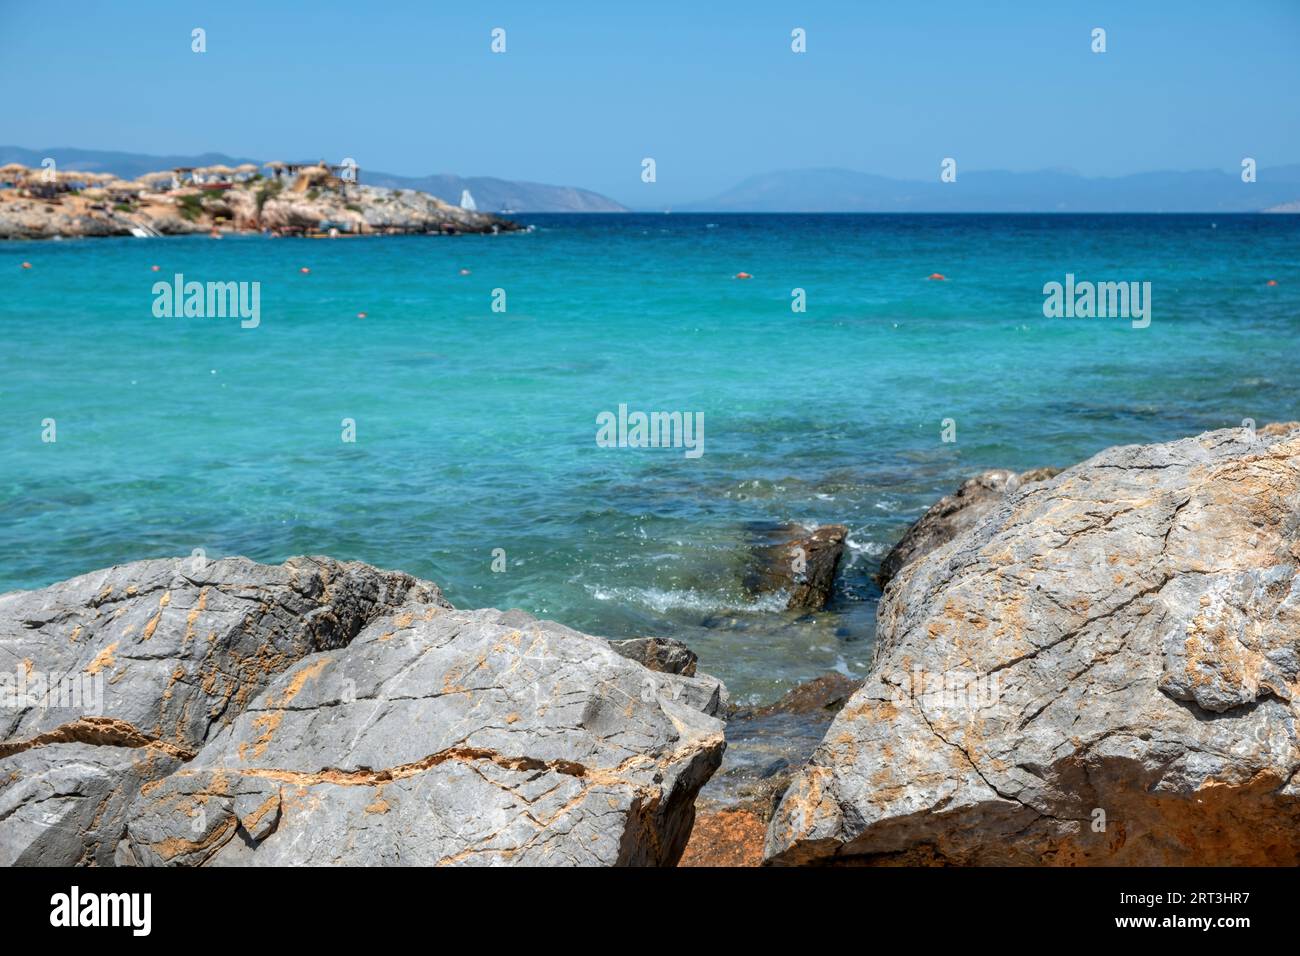 Aponisos beach Greece Agistri island. Clear view of big rock at seaside, turquoise sea water, blur rocky beach background. Summer day. Stock Photo